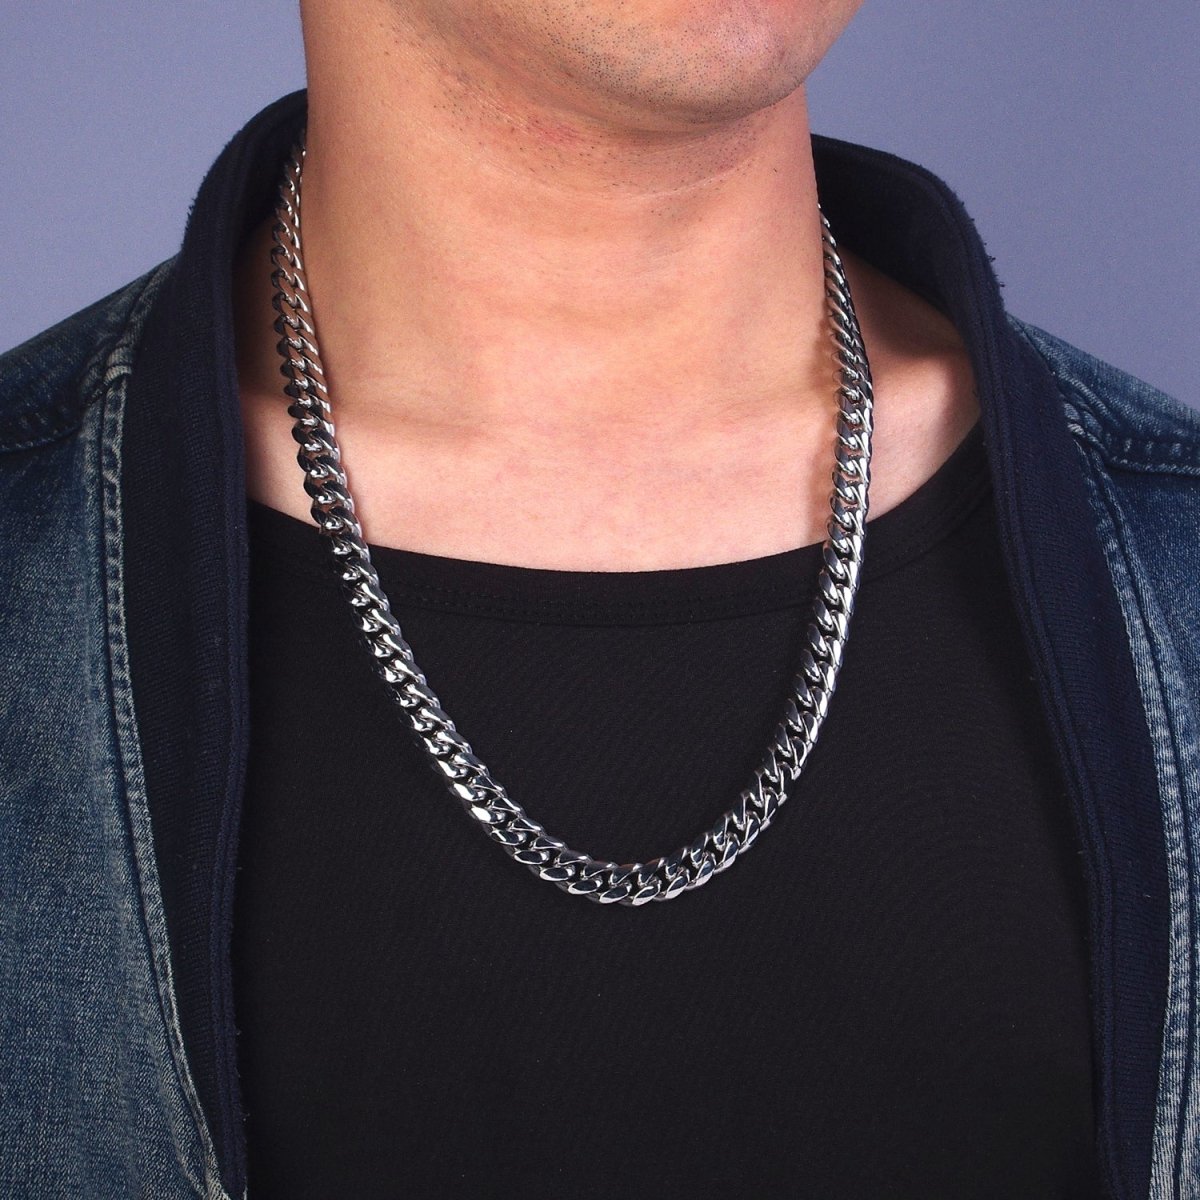 Silver Curb Chain Cuban Necklace for Men - Heavy Stainless Steel 10,12,14 mm Thickness 24.5 inch long | WA-1729 WA-1730 WA-1731 Clearance Pricing - DLUXCA